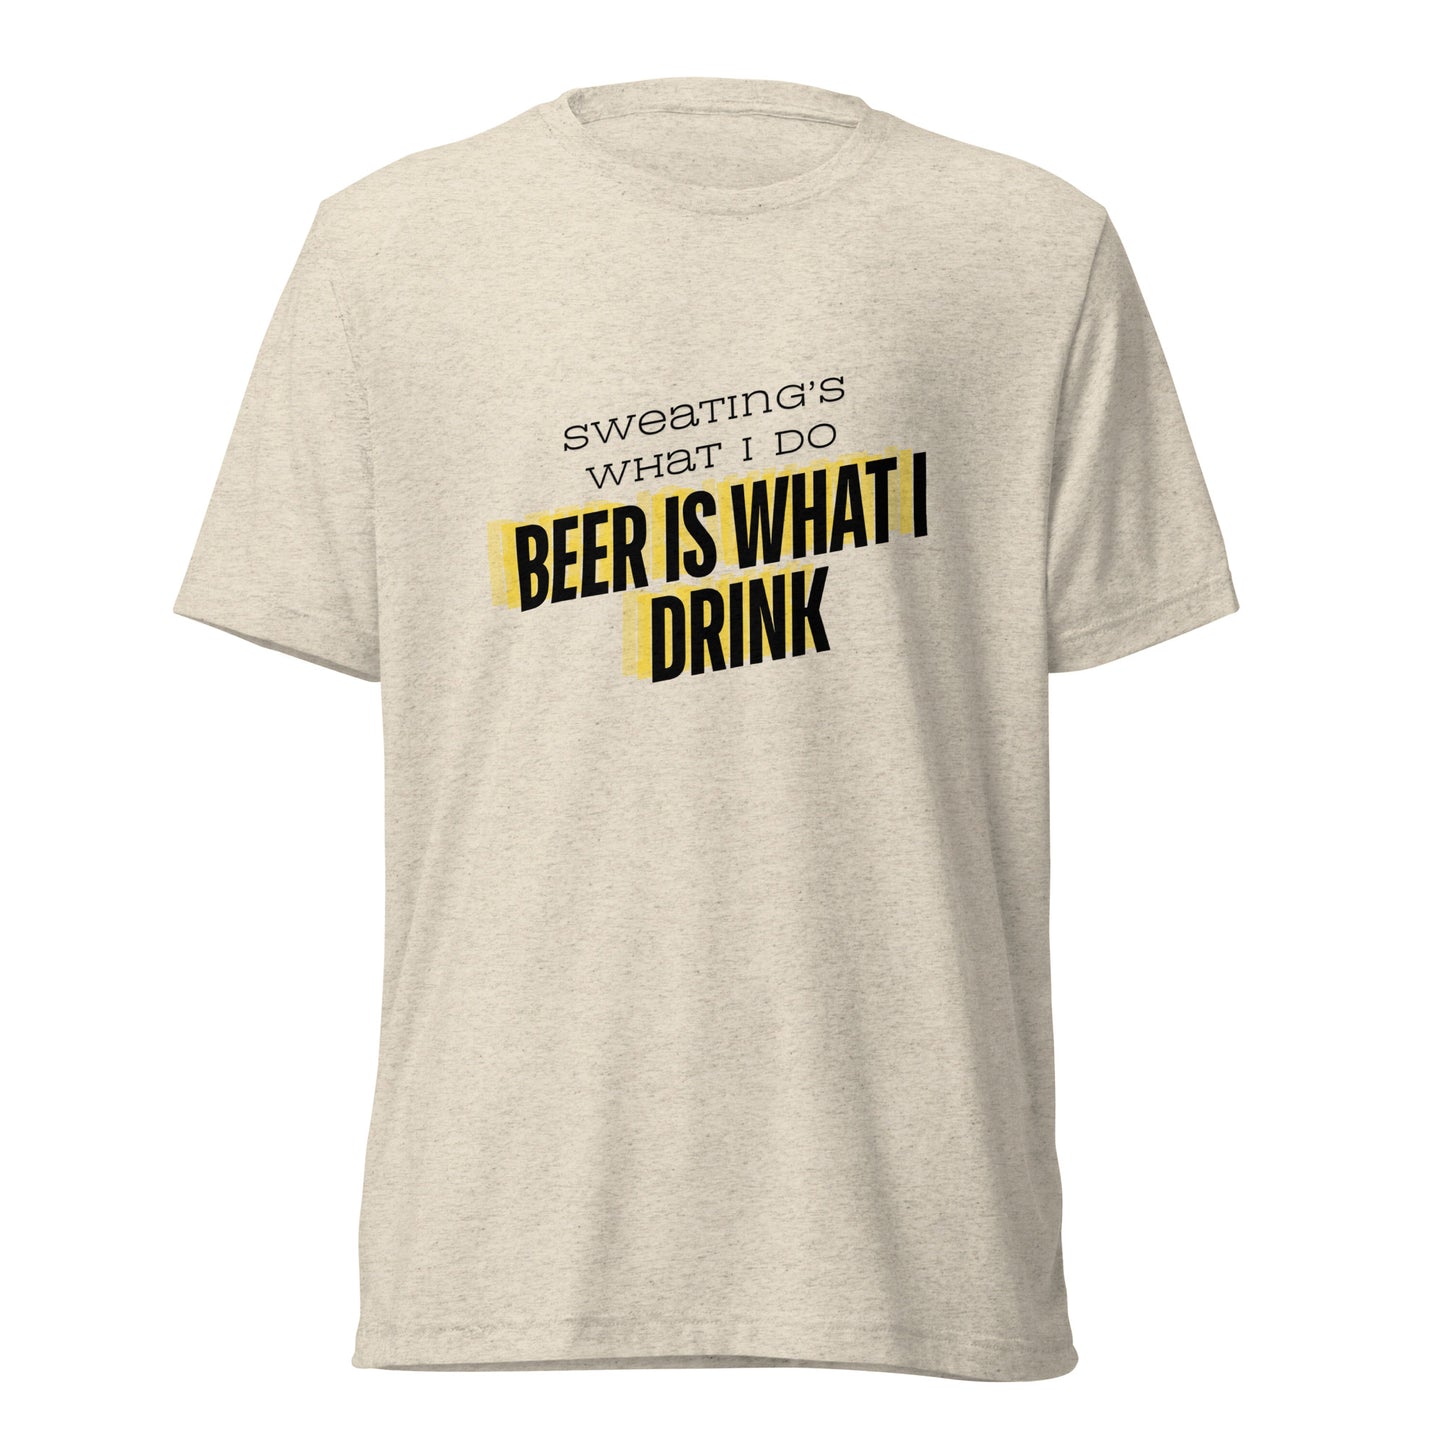 sweating's what I do, beer is what I drink t-shirt